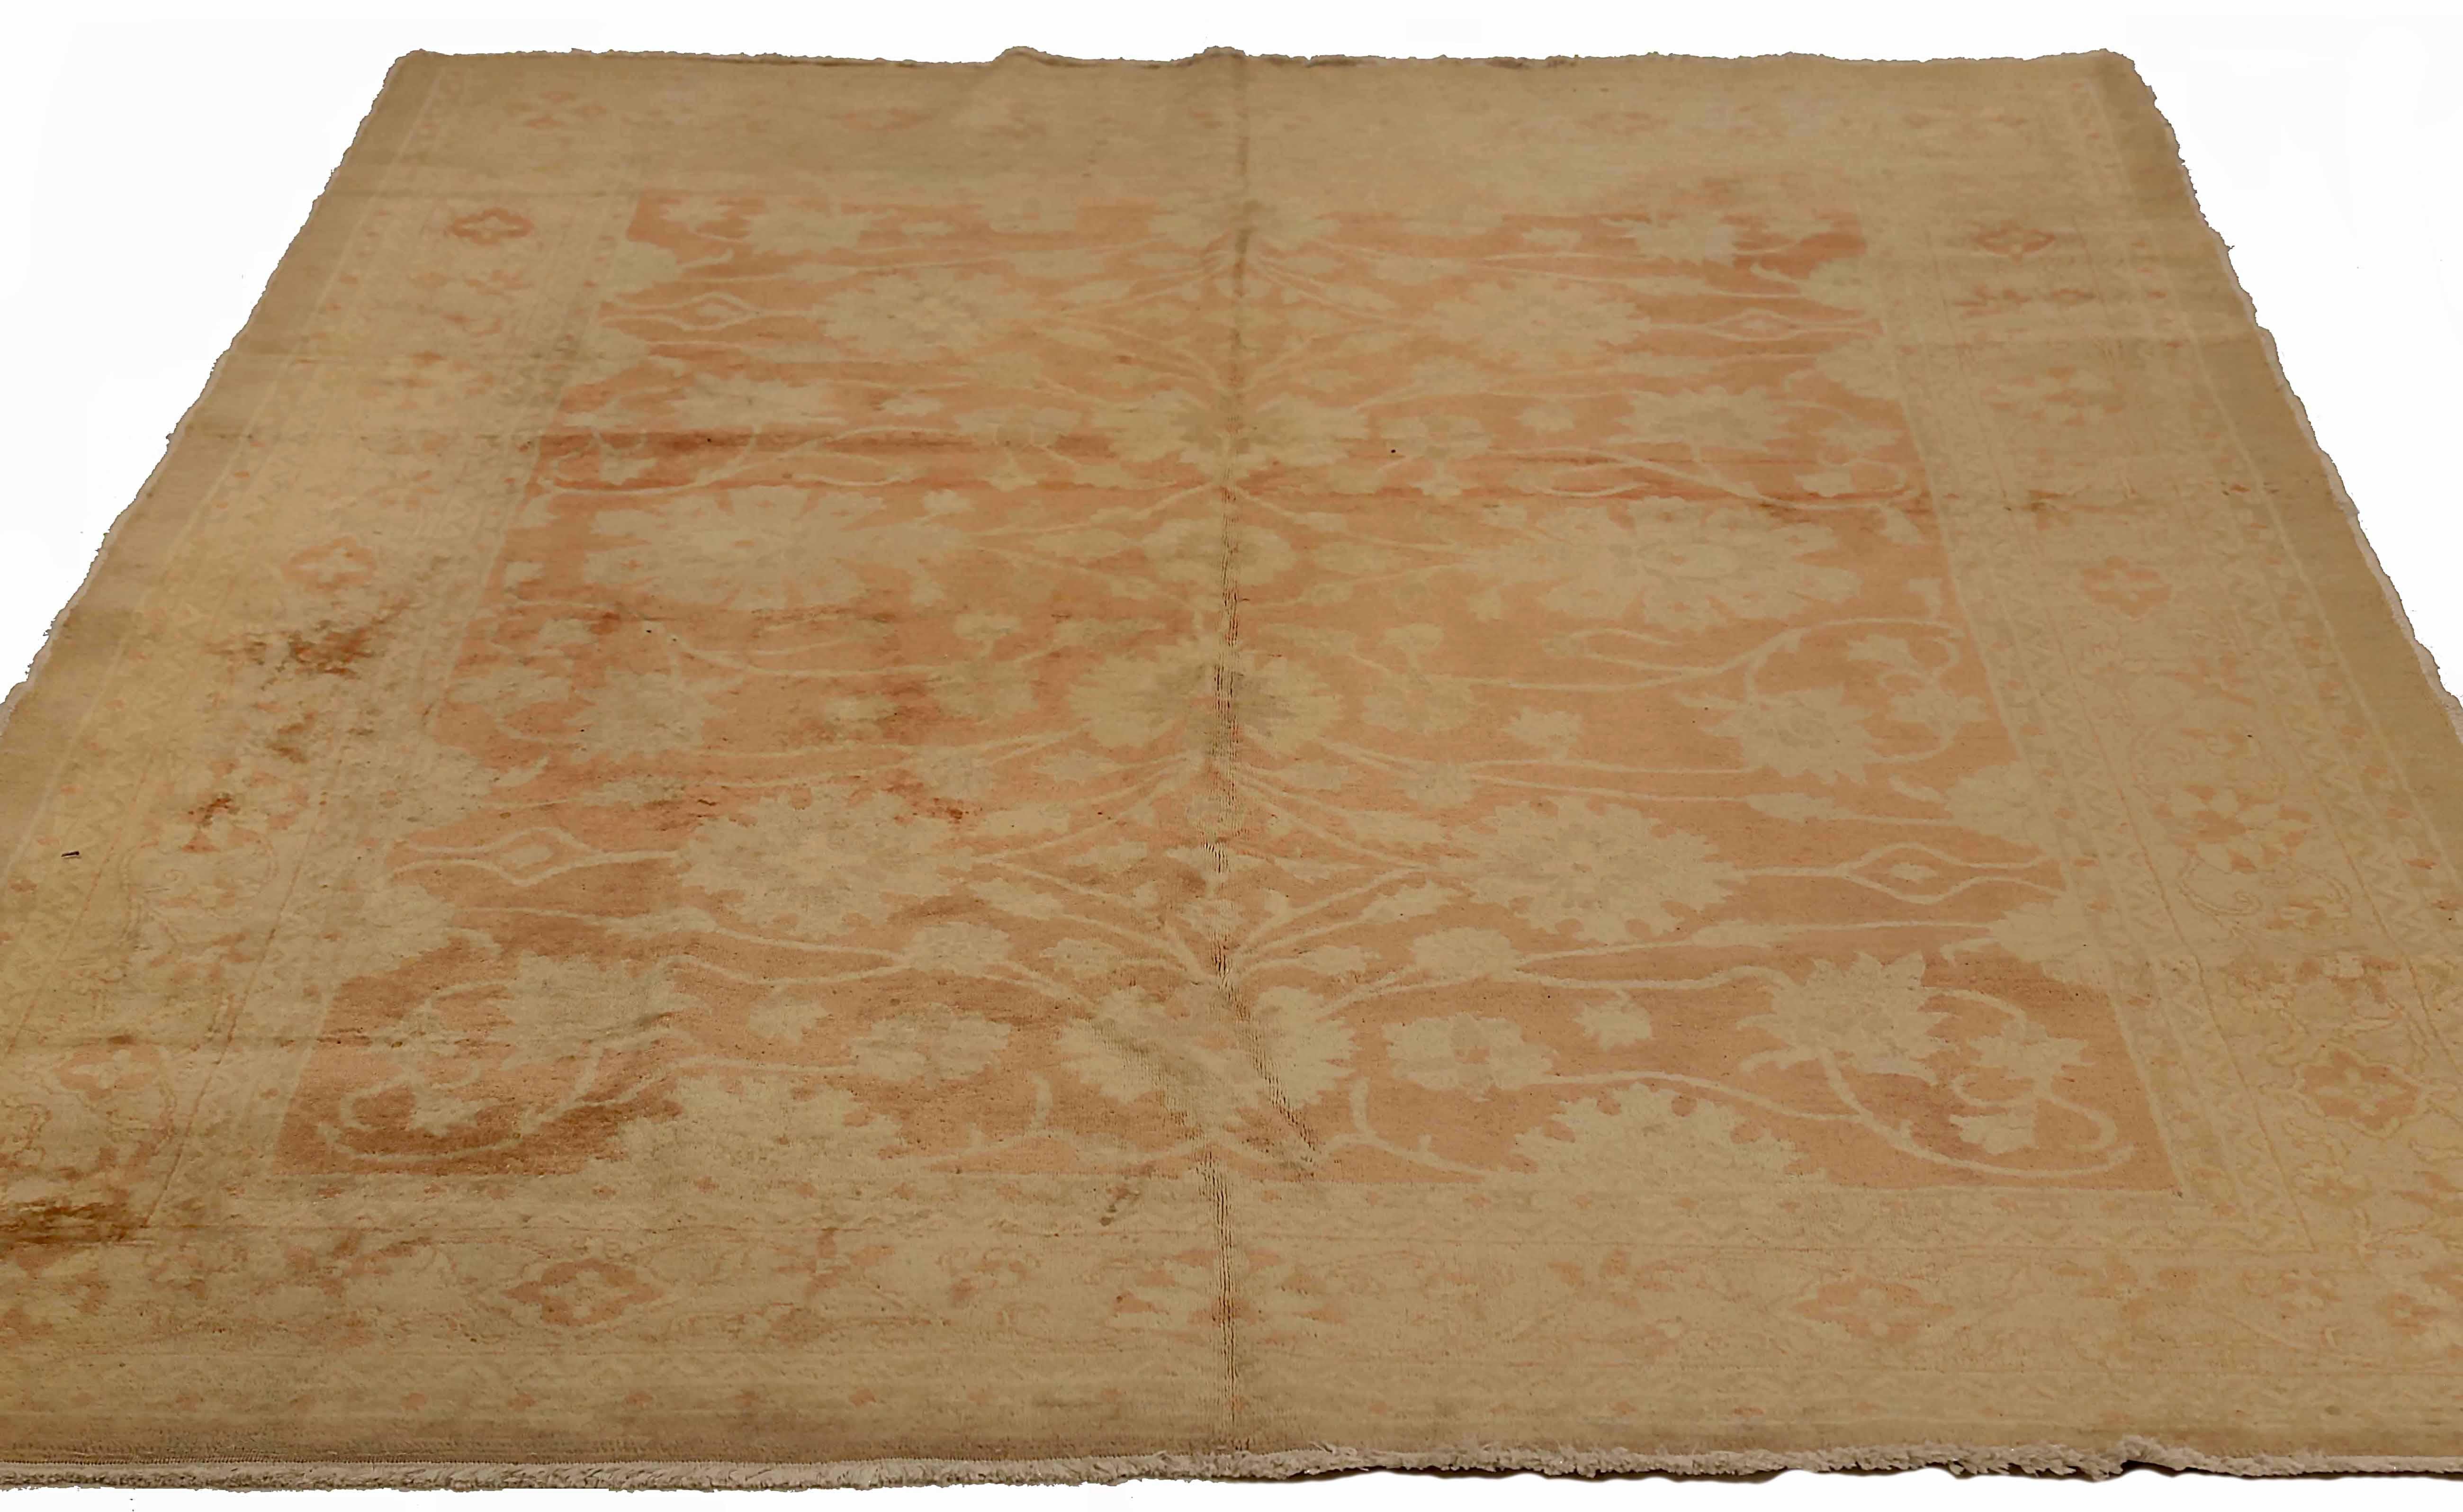 Antique Persian area rug handwoven from the finest sheep’s wool. It’s colored with all-natural vegetable dyes that are safe for humans and pets. It’s a traditional Tabriz design handwoven by expert artisans. It’s a lovely area rug that can be